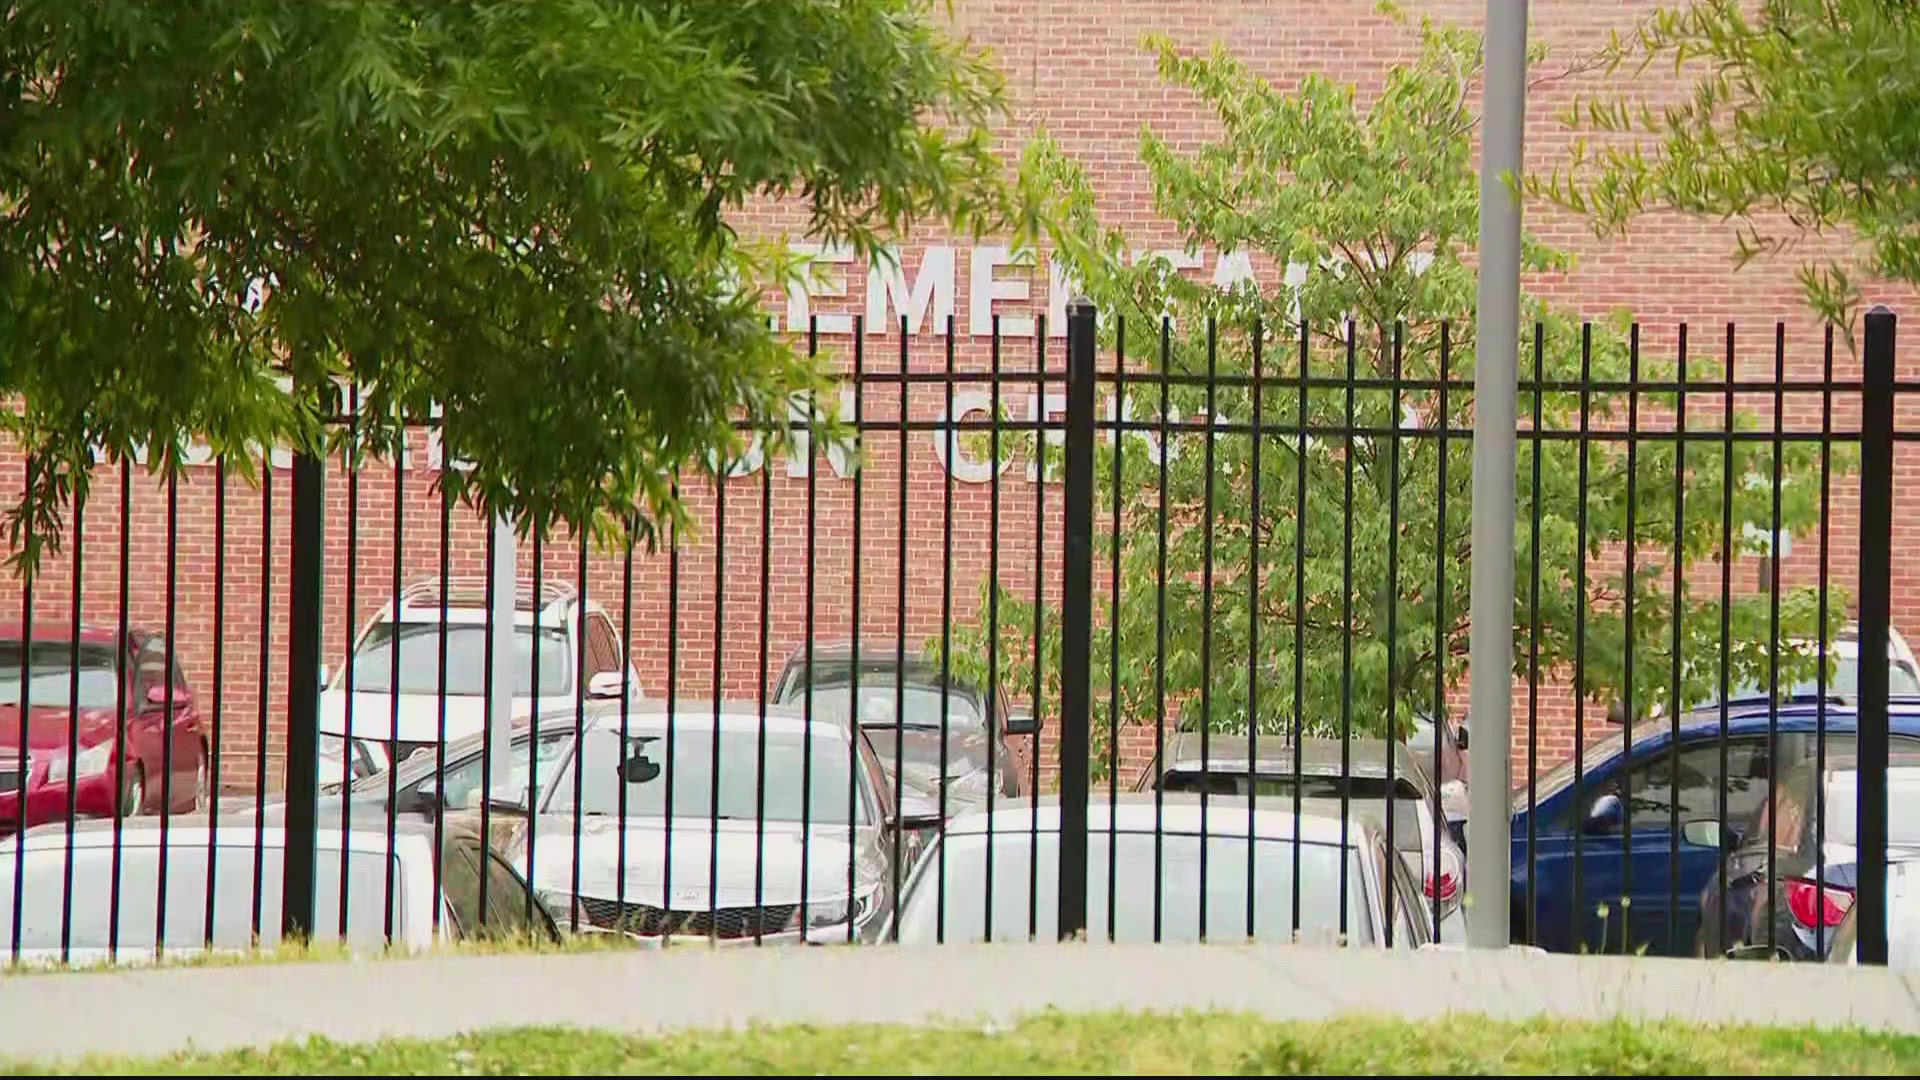 The shooting happened nearby Turner Elementary School in Southeast D.C.